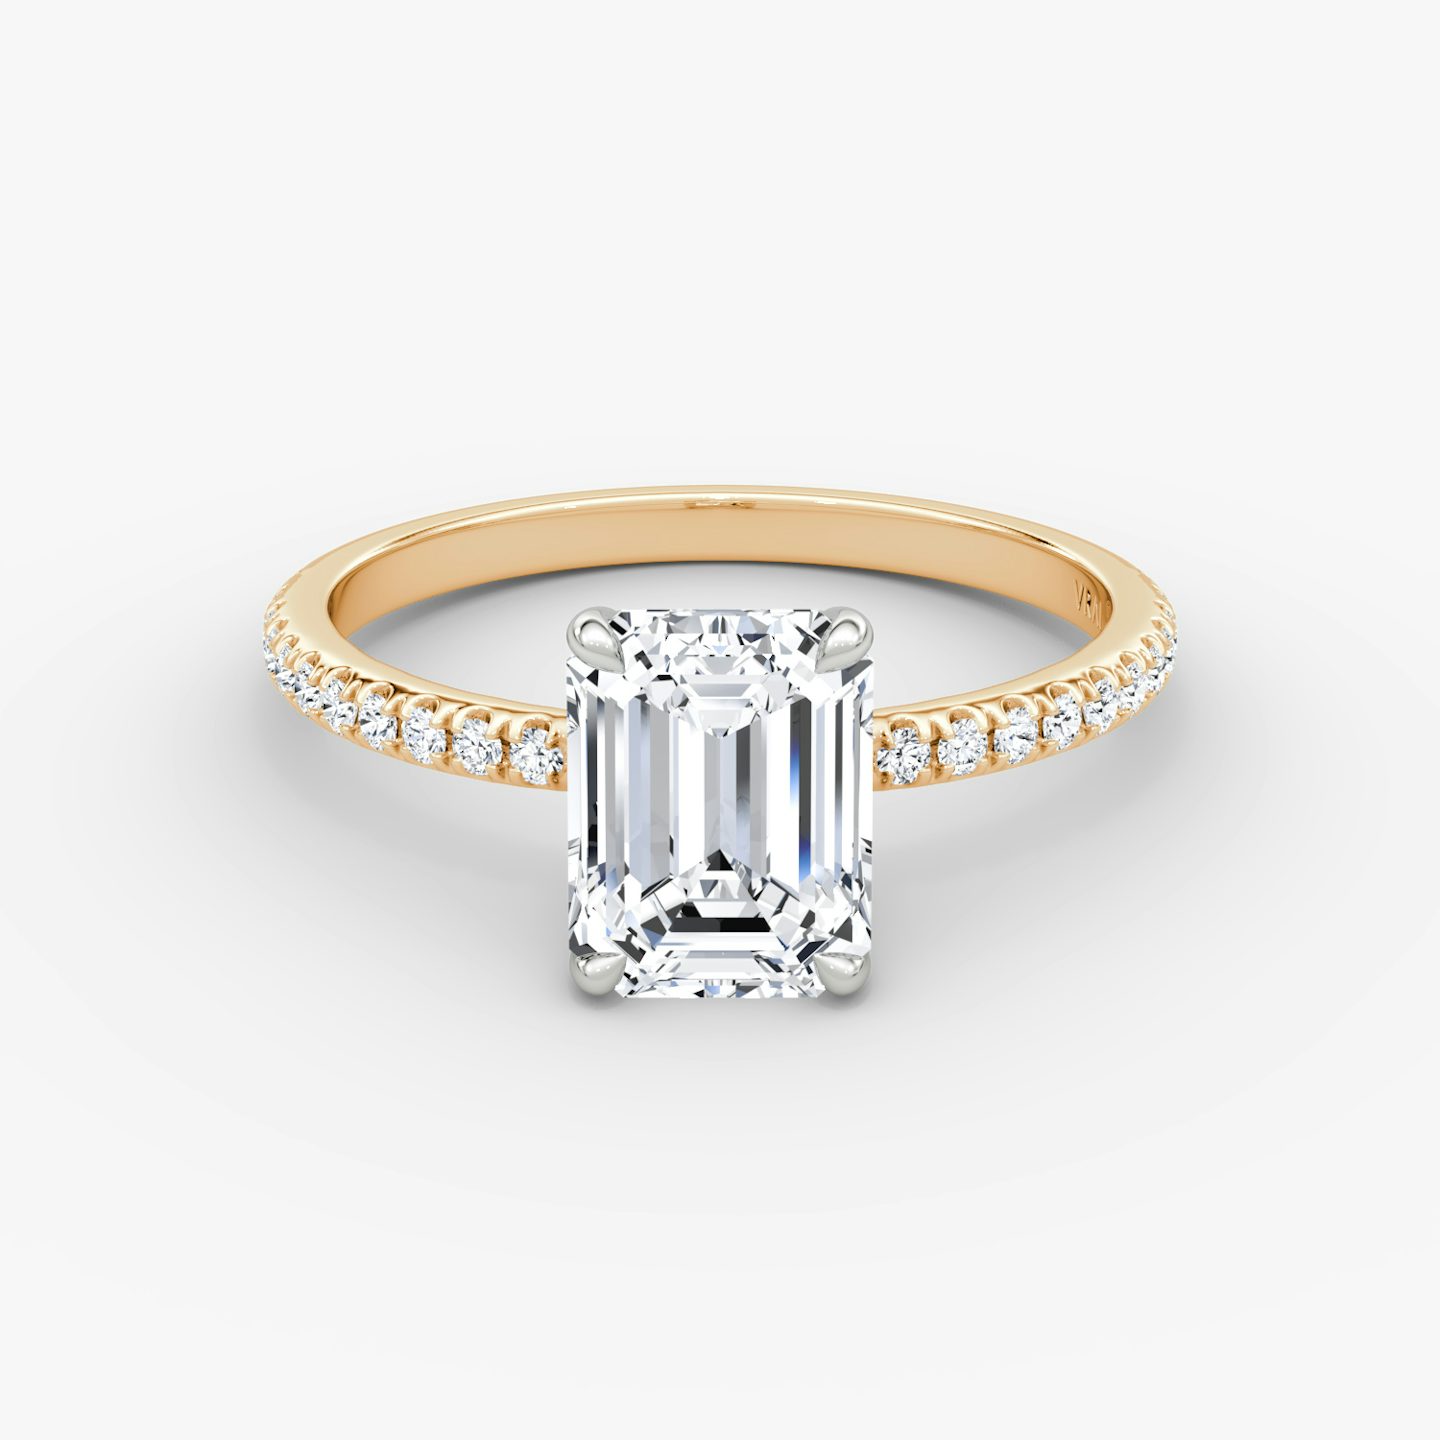 The Signature | Emerald | 14k | 14k Rose Gold and Platinum | Band: Pavé | Band width: Standard | Setting style: Plain | Diamond orientation: vertical | Carat weight: See full inventory